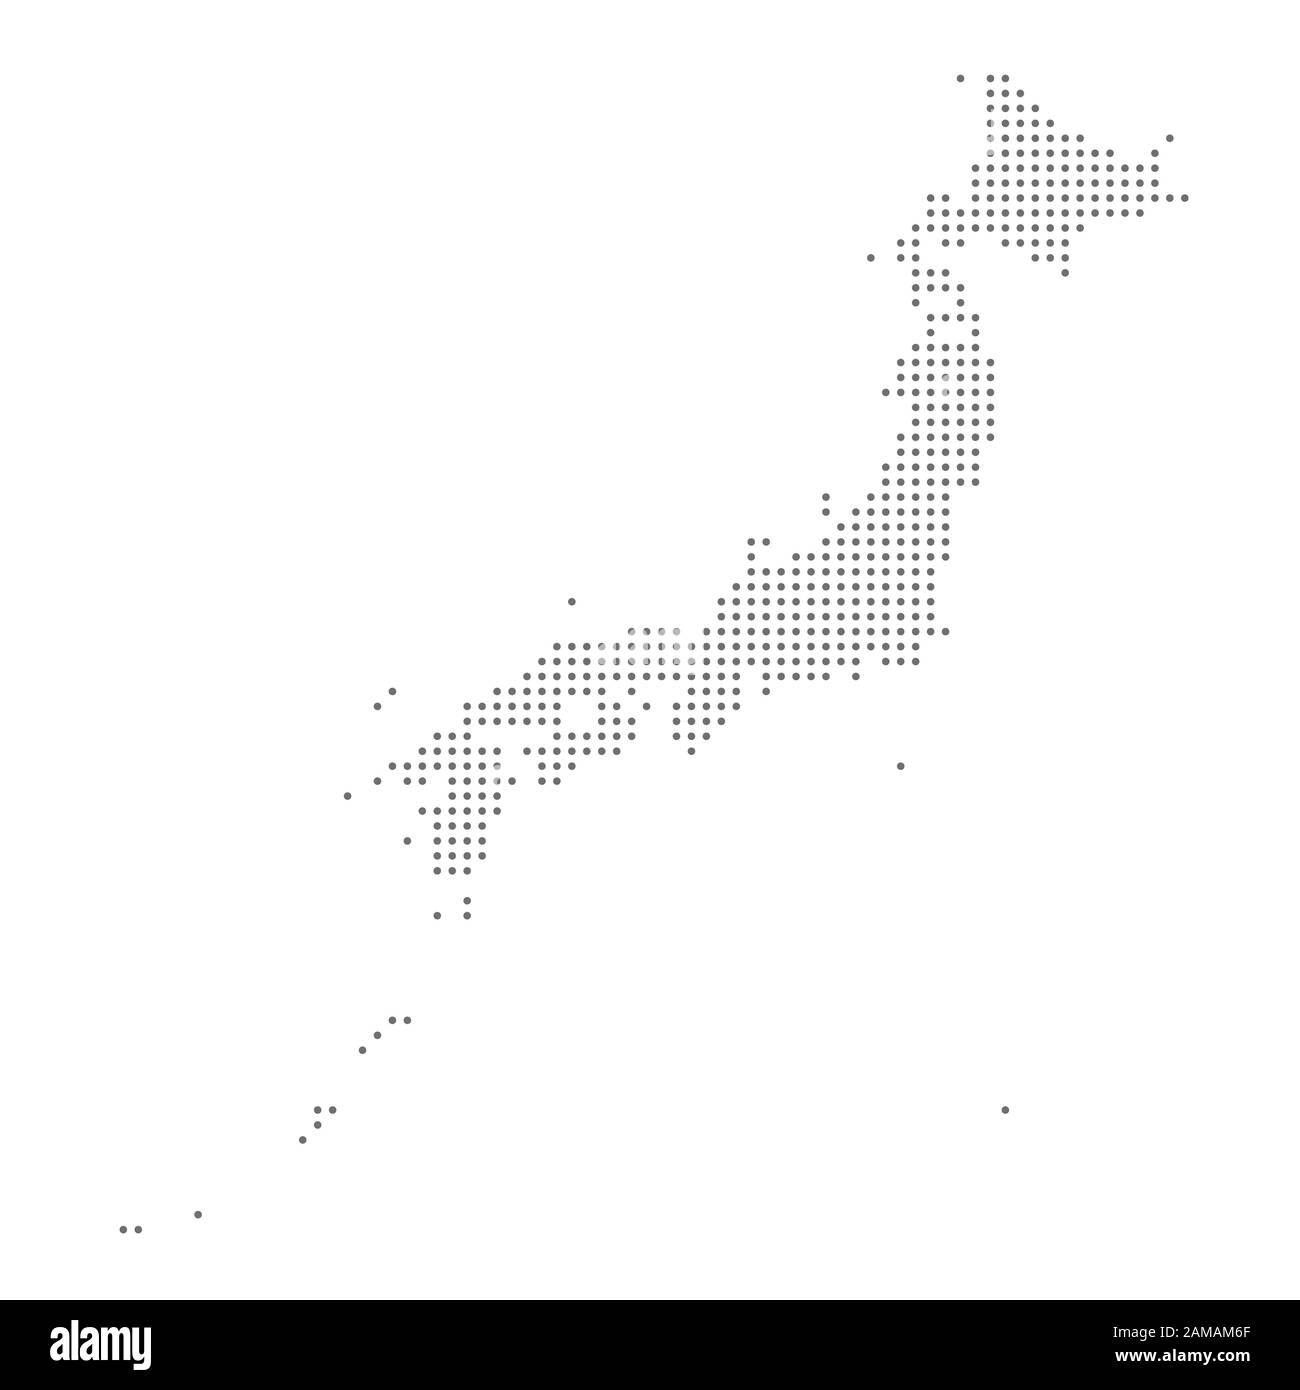 Japan map dotted, grey point, on white background. Vector illustration. Web design, wallpaper, flyers, invitation, posters, brochure, banners. Stock Vector